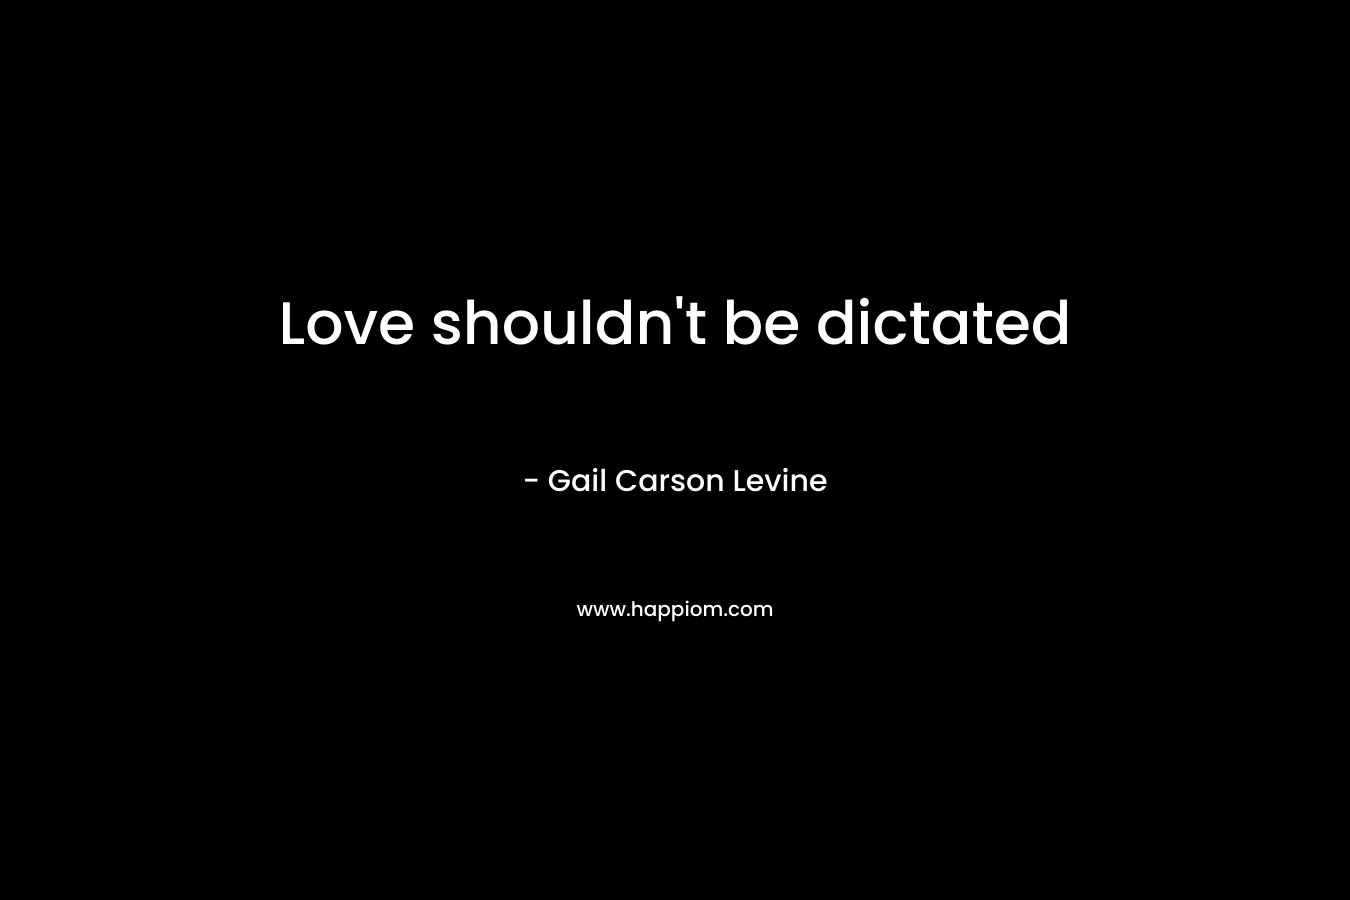 Love shouldn’t be dictated – Gail Carson Levine